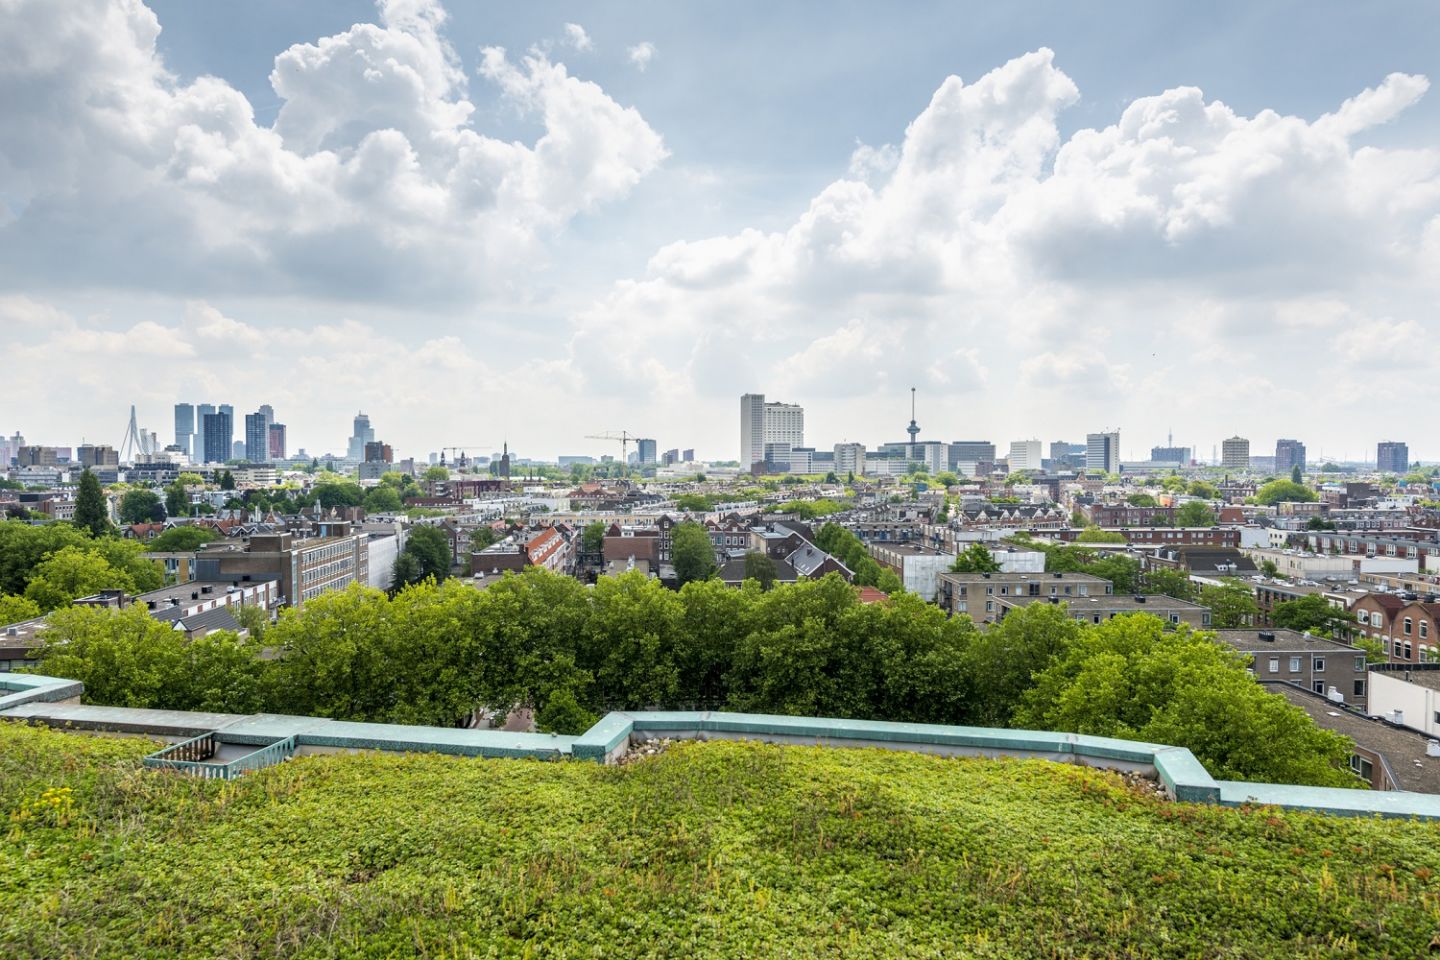 GREEN ROOFS